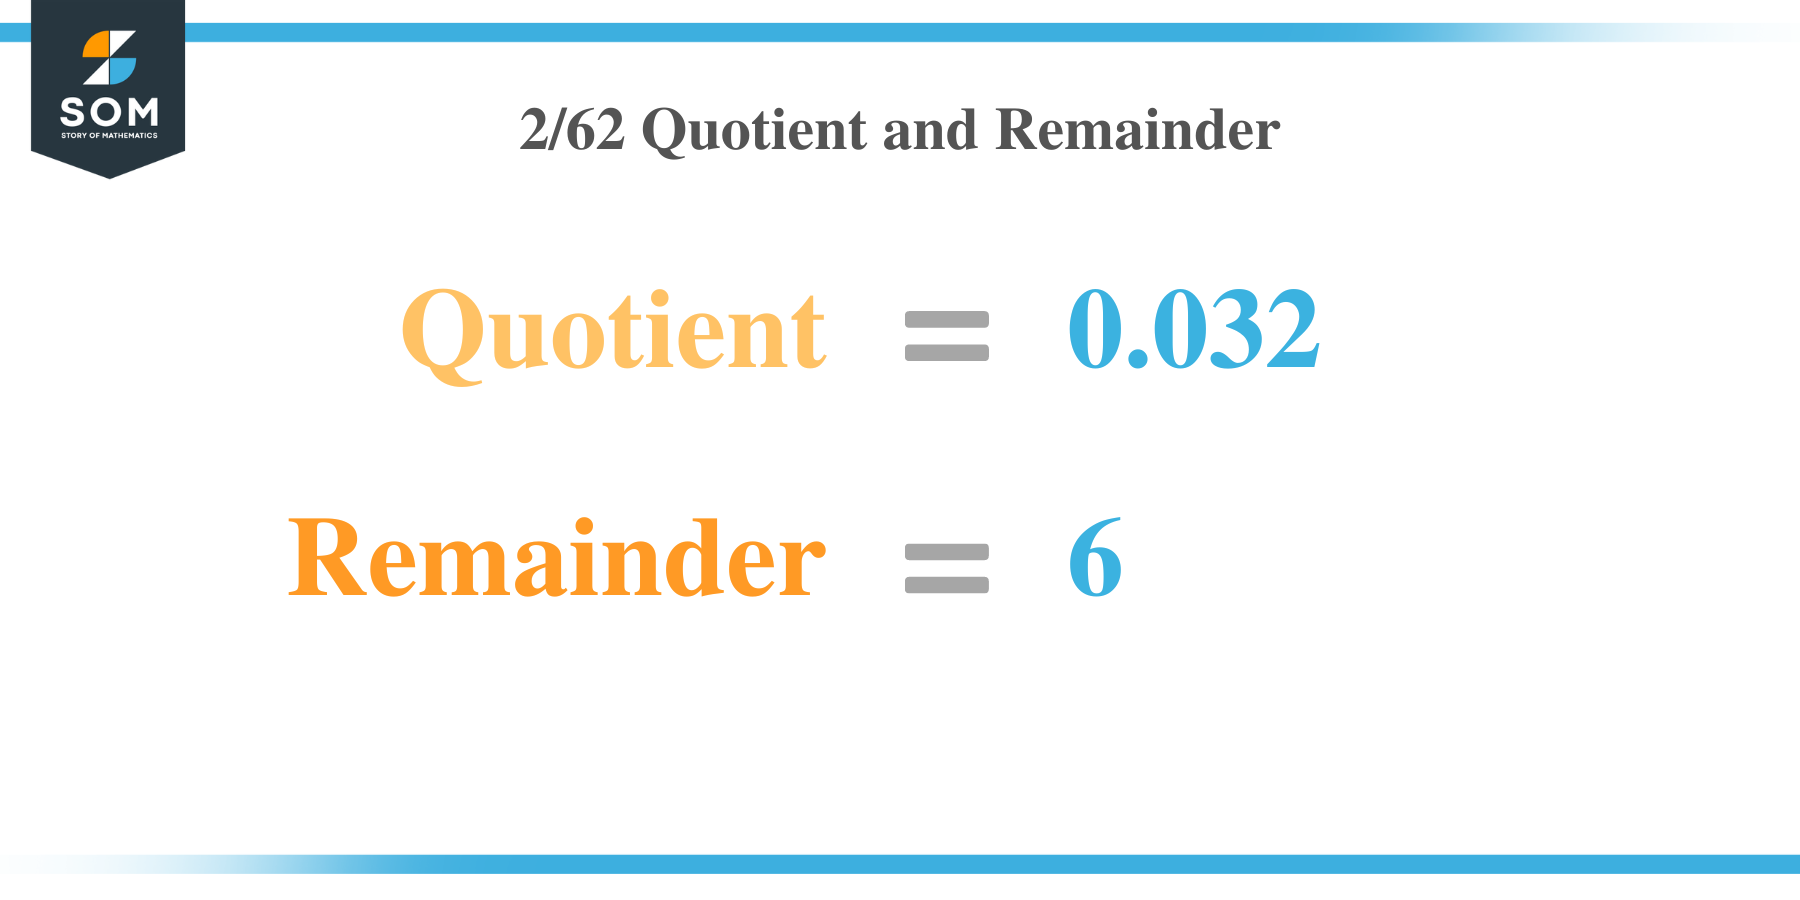 2 by 62 Quotient and Remainder